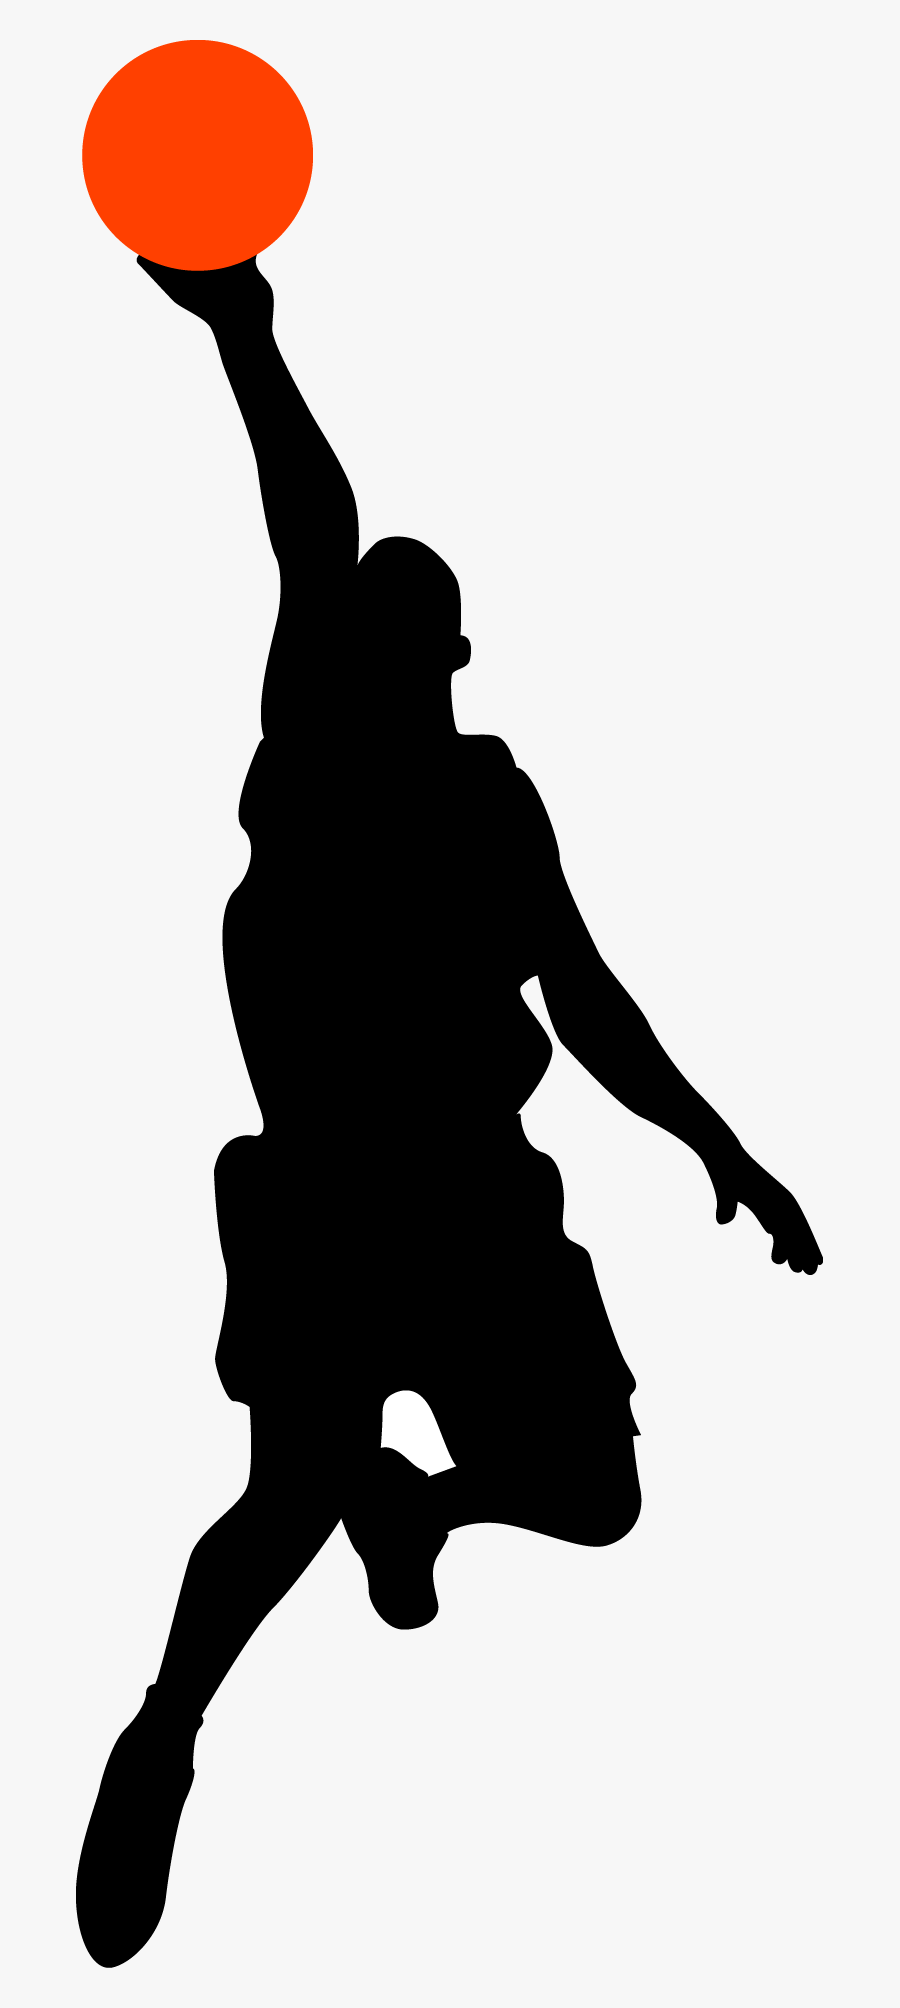 Athlete Vector Silhouette Basketball - Silhouette Basketball Vector Png, Transparent Clipart